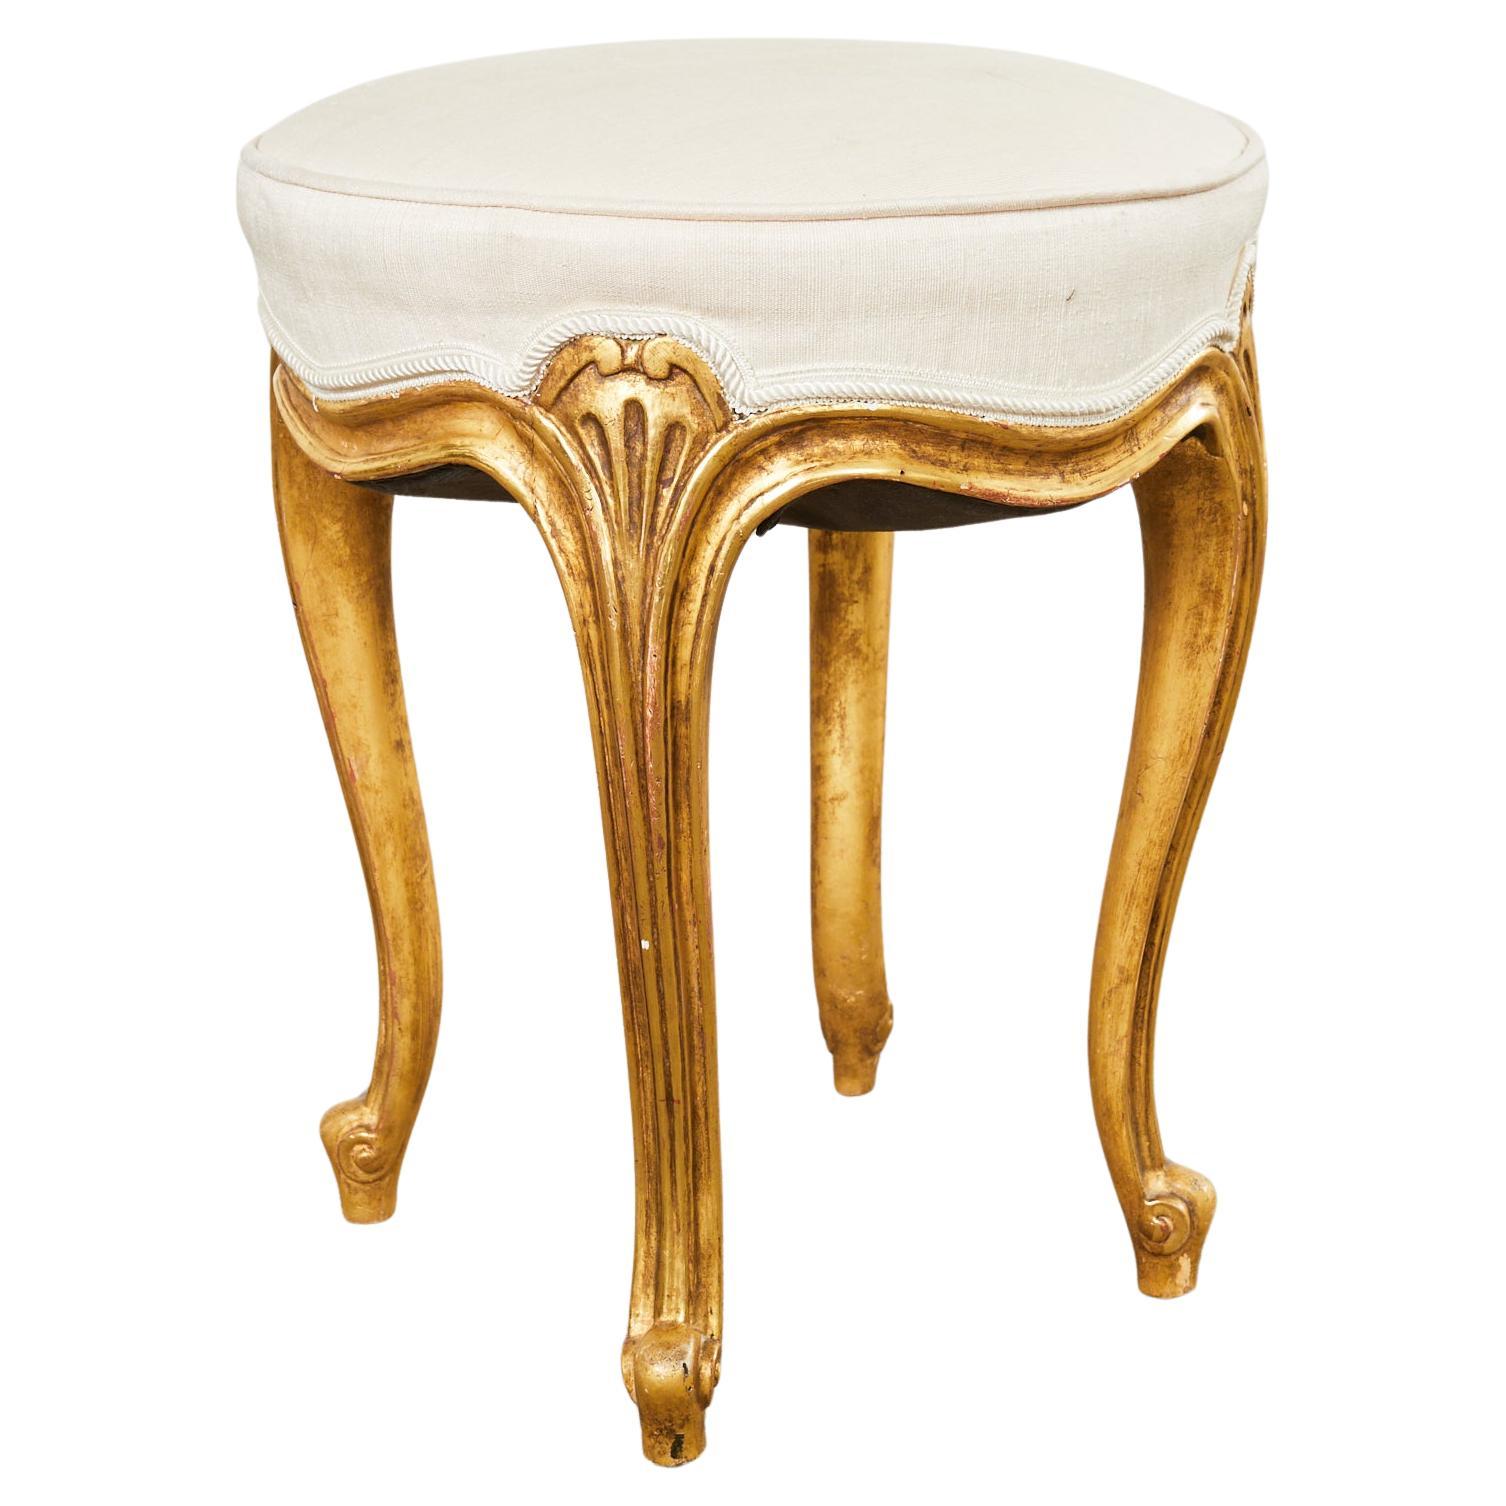 Rose Tarlow French Provincial Style Giltwood Carved Footstool For Sale